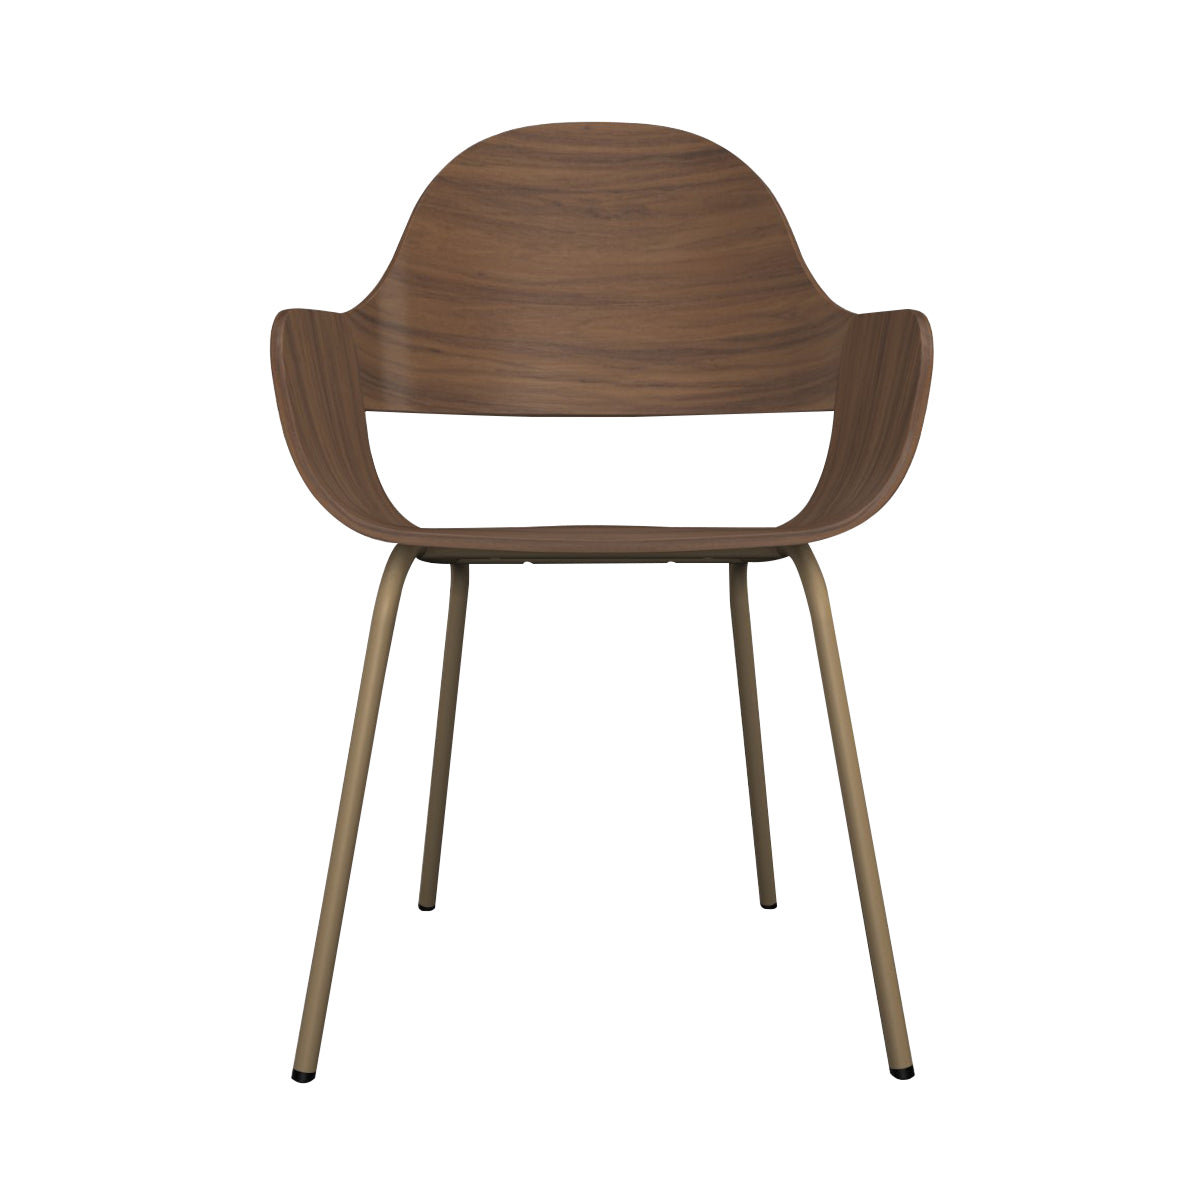 Showtime Nude Chair with Metal Legs: Walnut + Beige